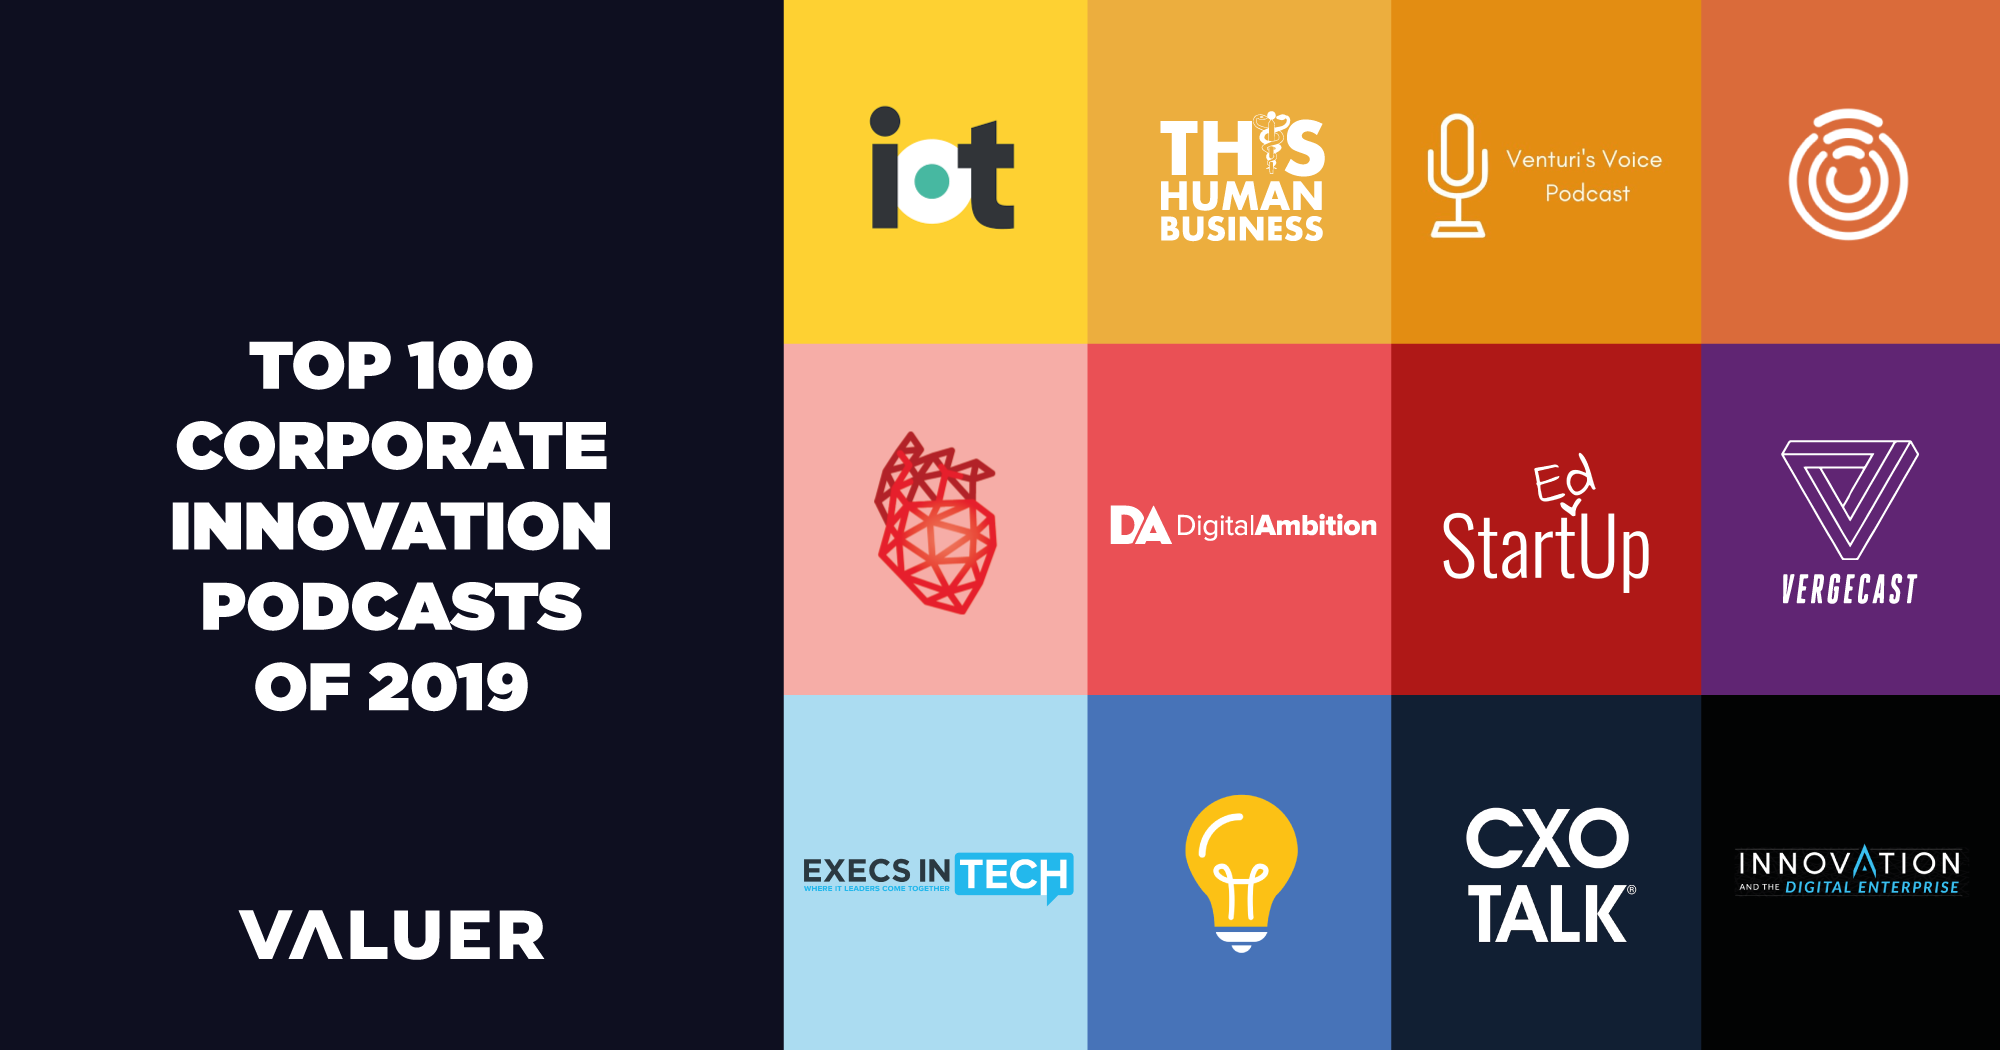 The Top 100 Corporate Innovation Podcasts List